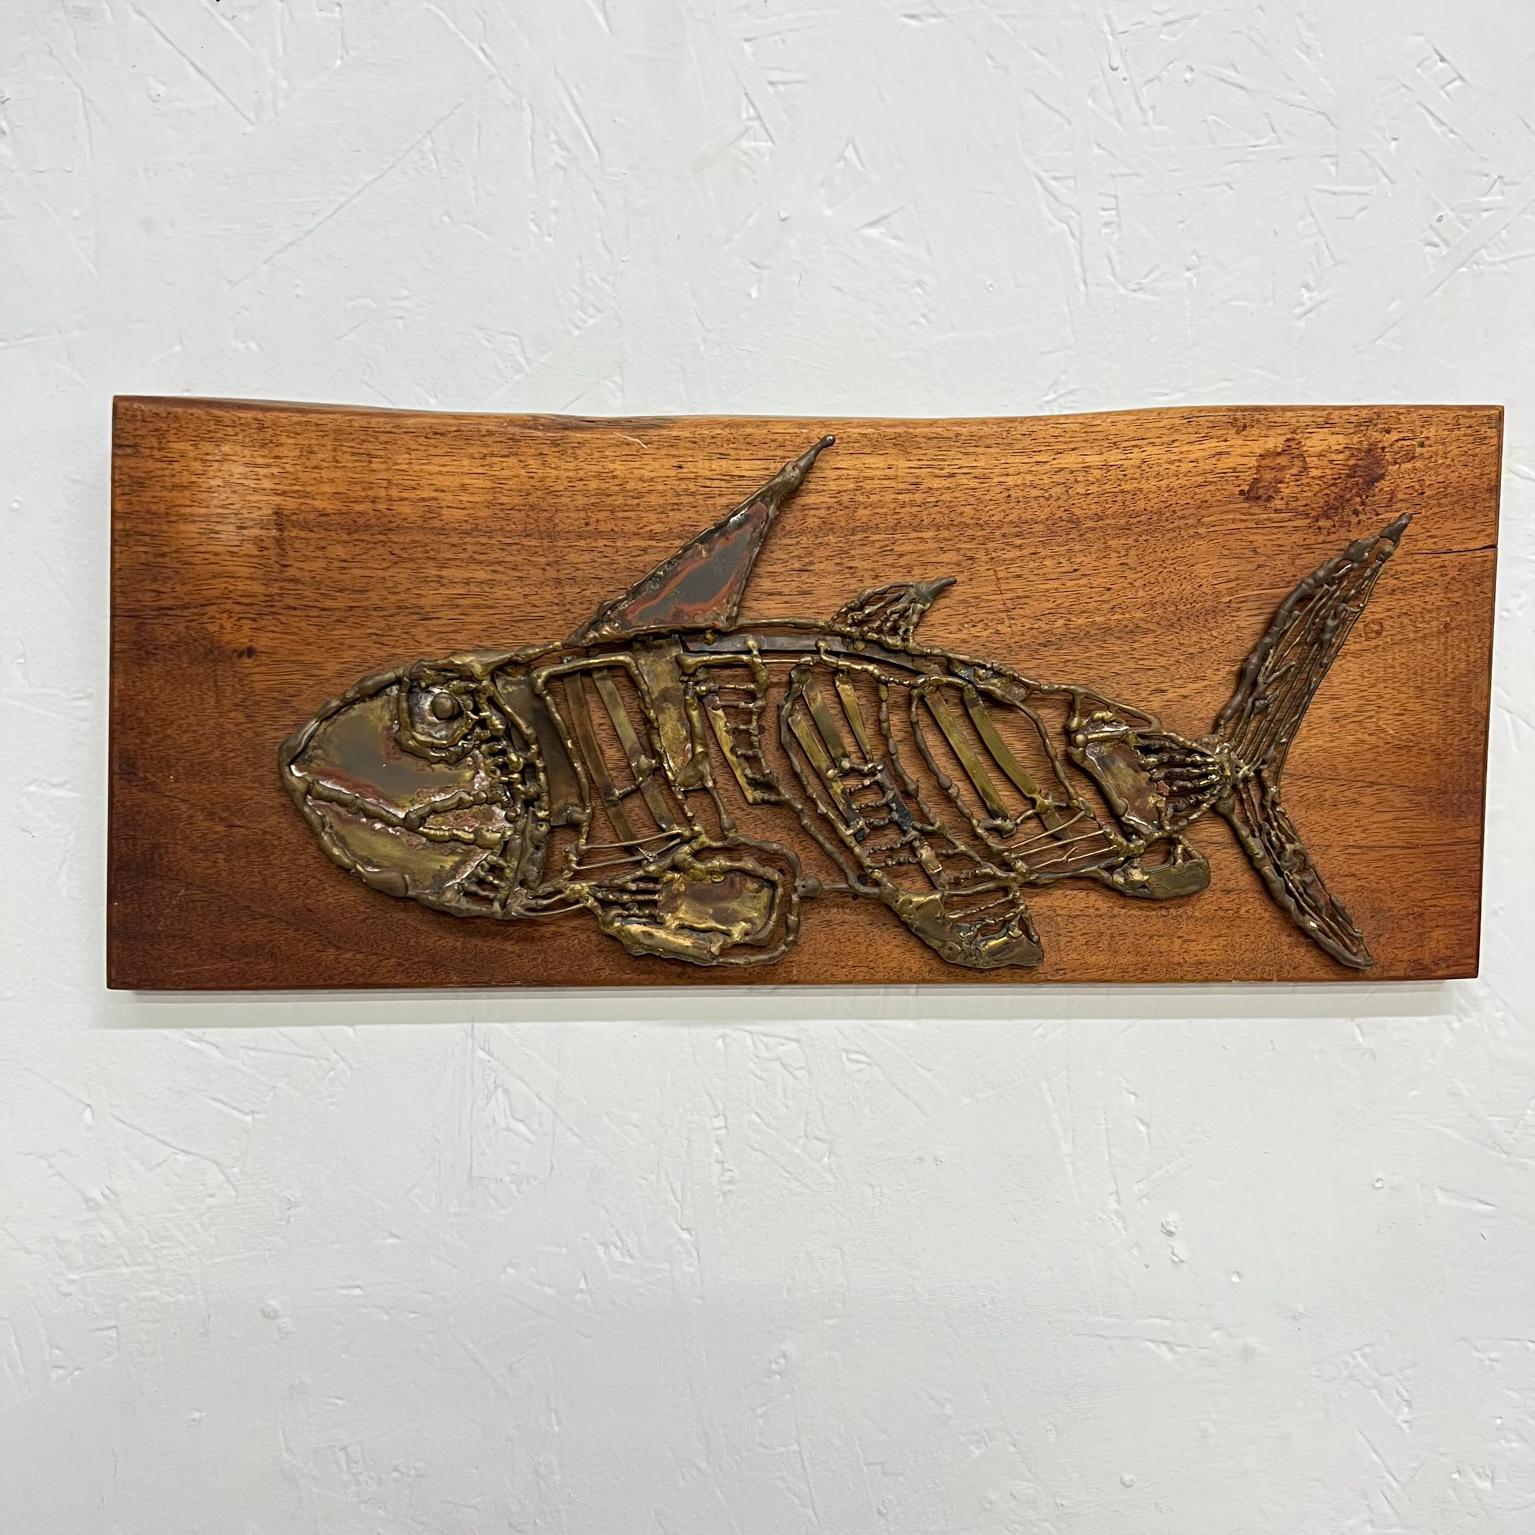 1970s Modern Brutalist Wall Art Bronzed Metal Fish on Wood Plaque For Sale 2